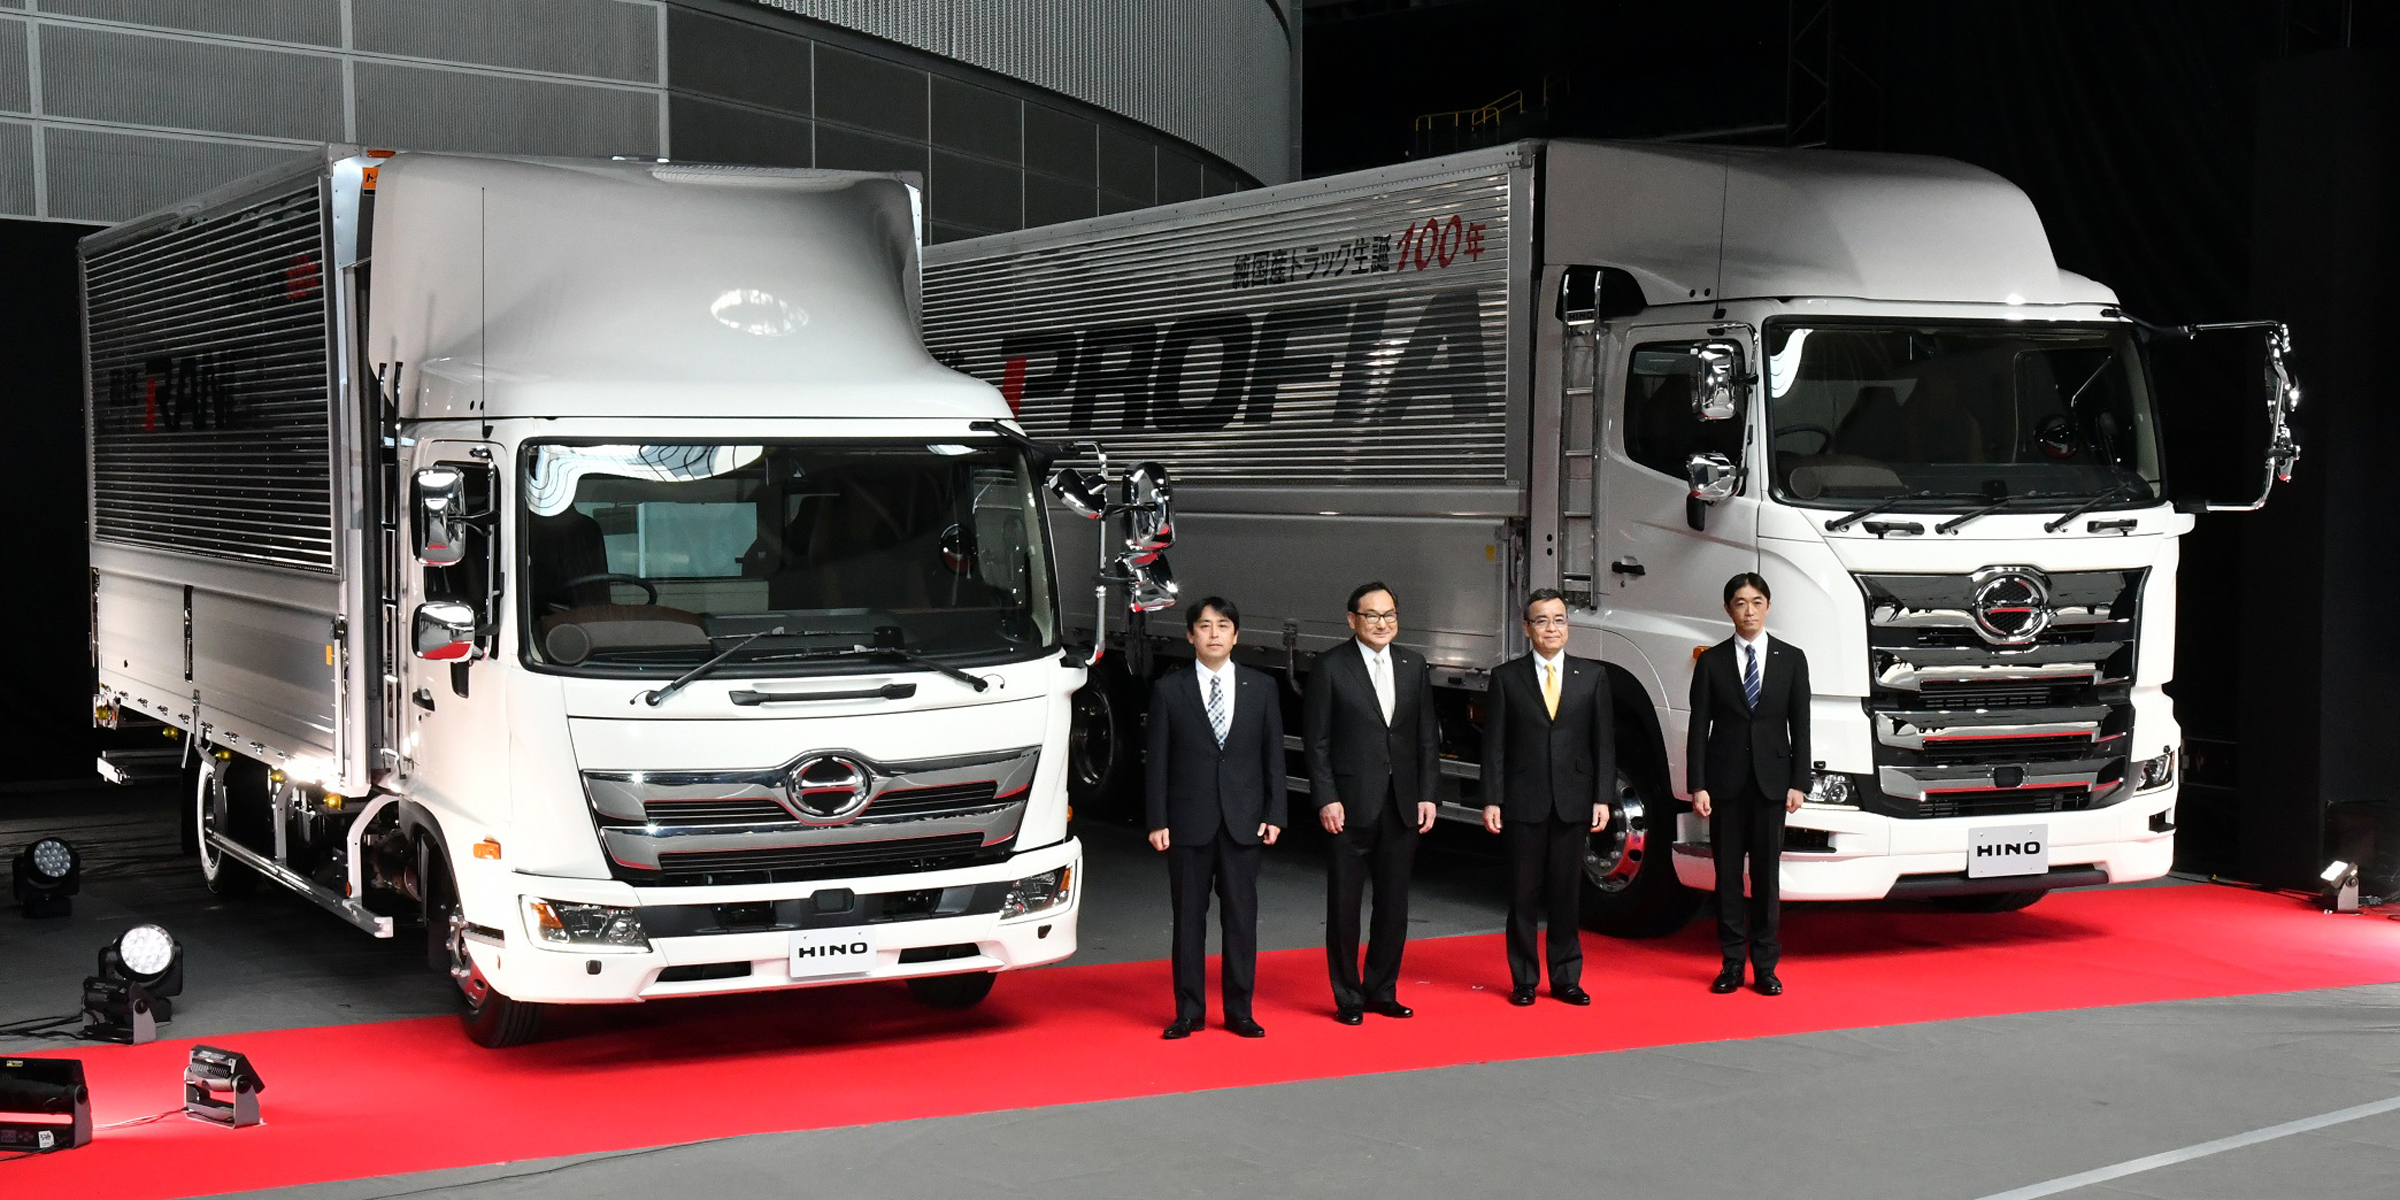 Hino Improves Truck Comfort, Operability With Full Upgrades to